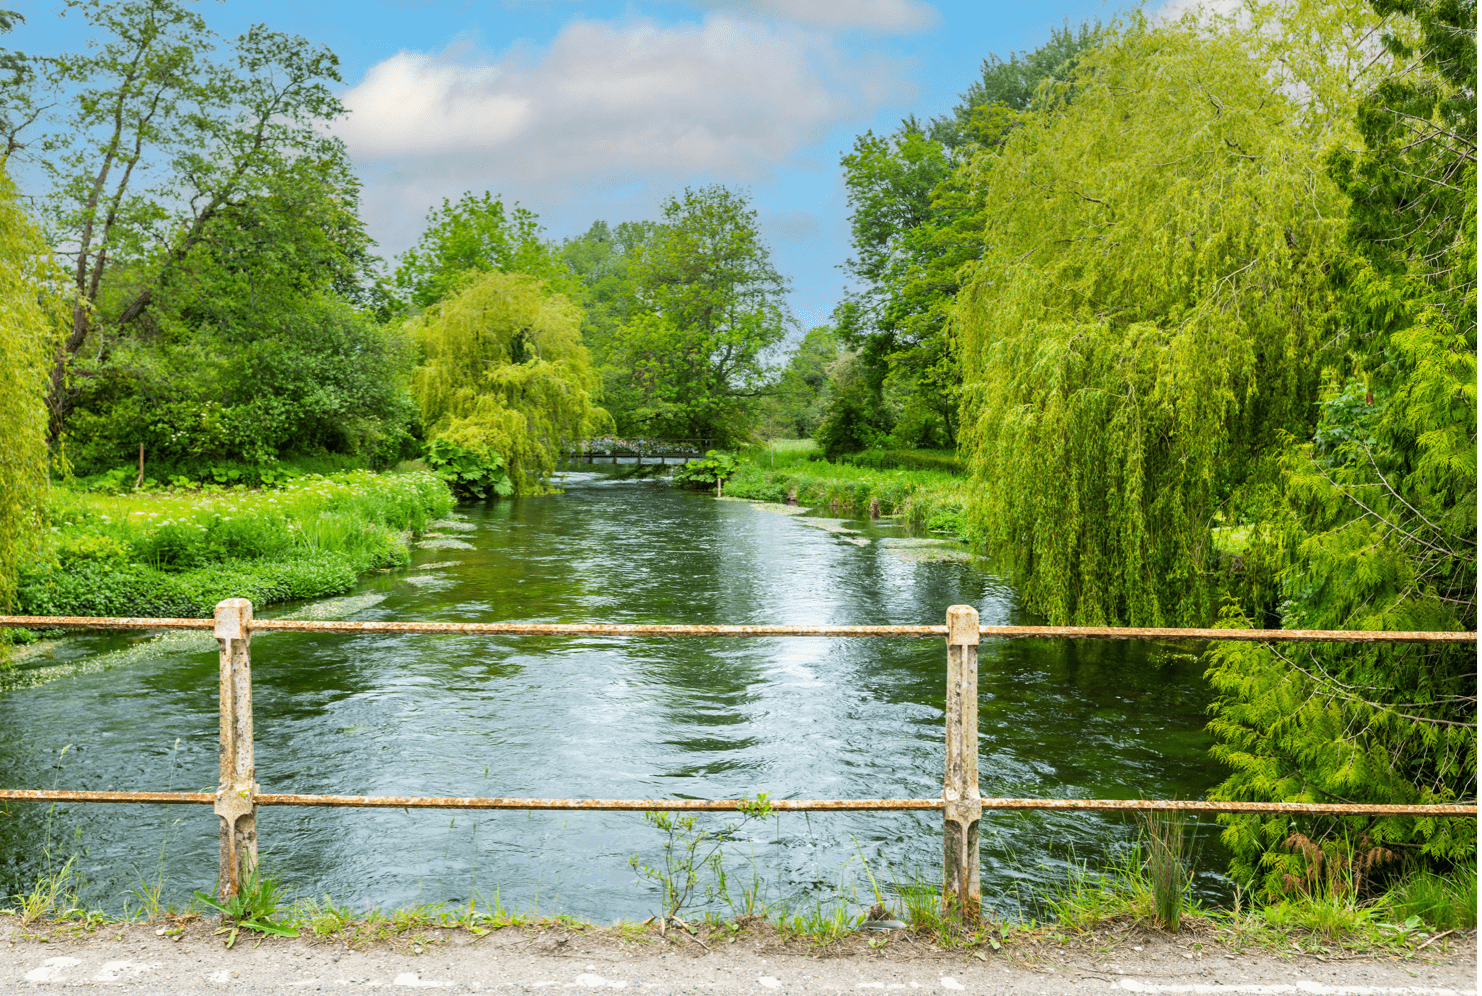 A photo taken from a bridge over a river looking downstream